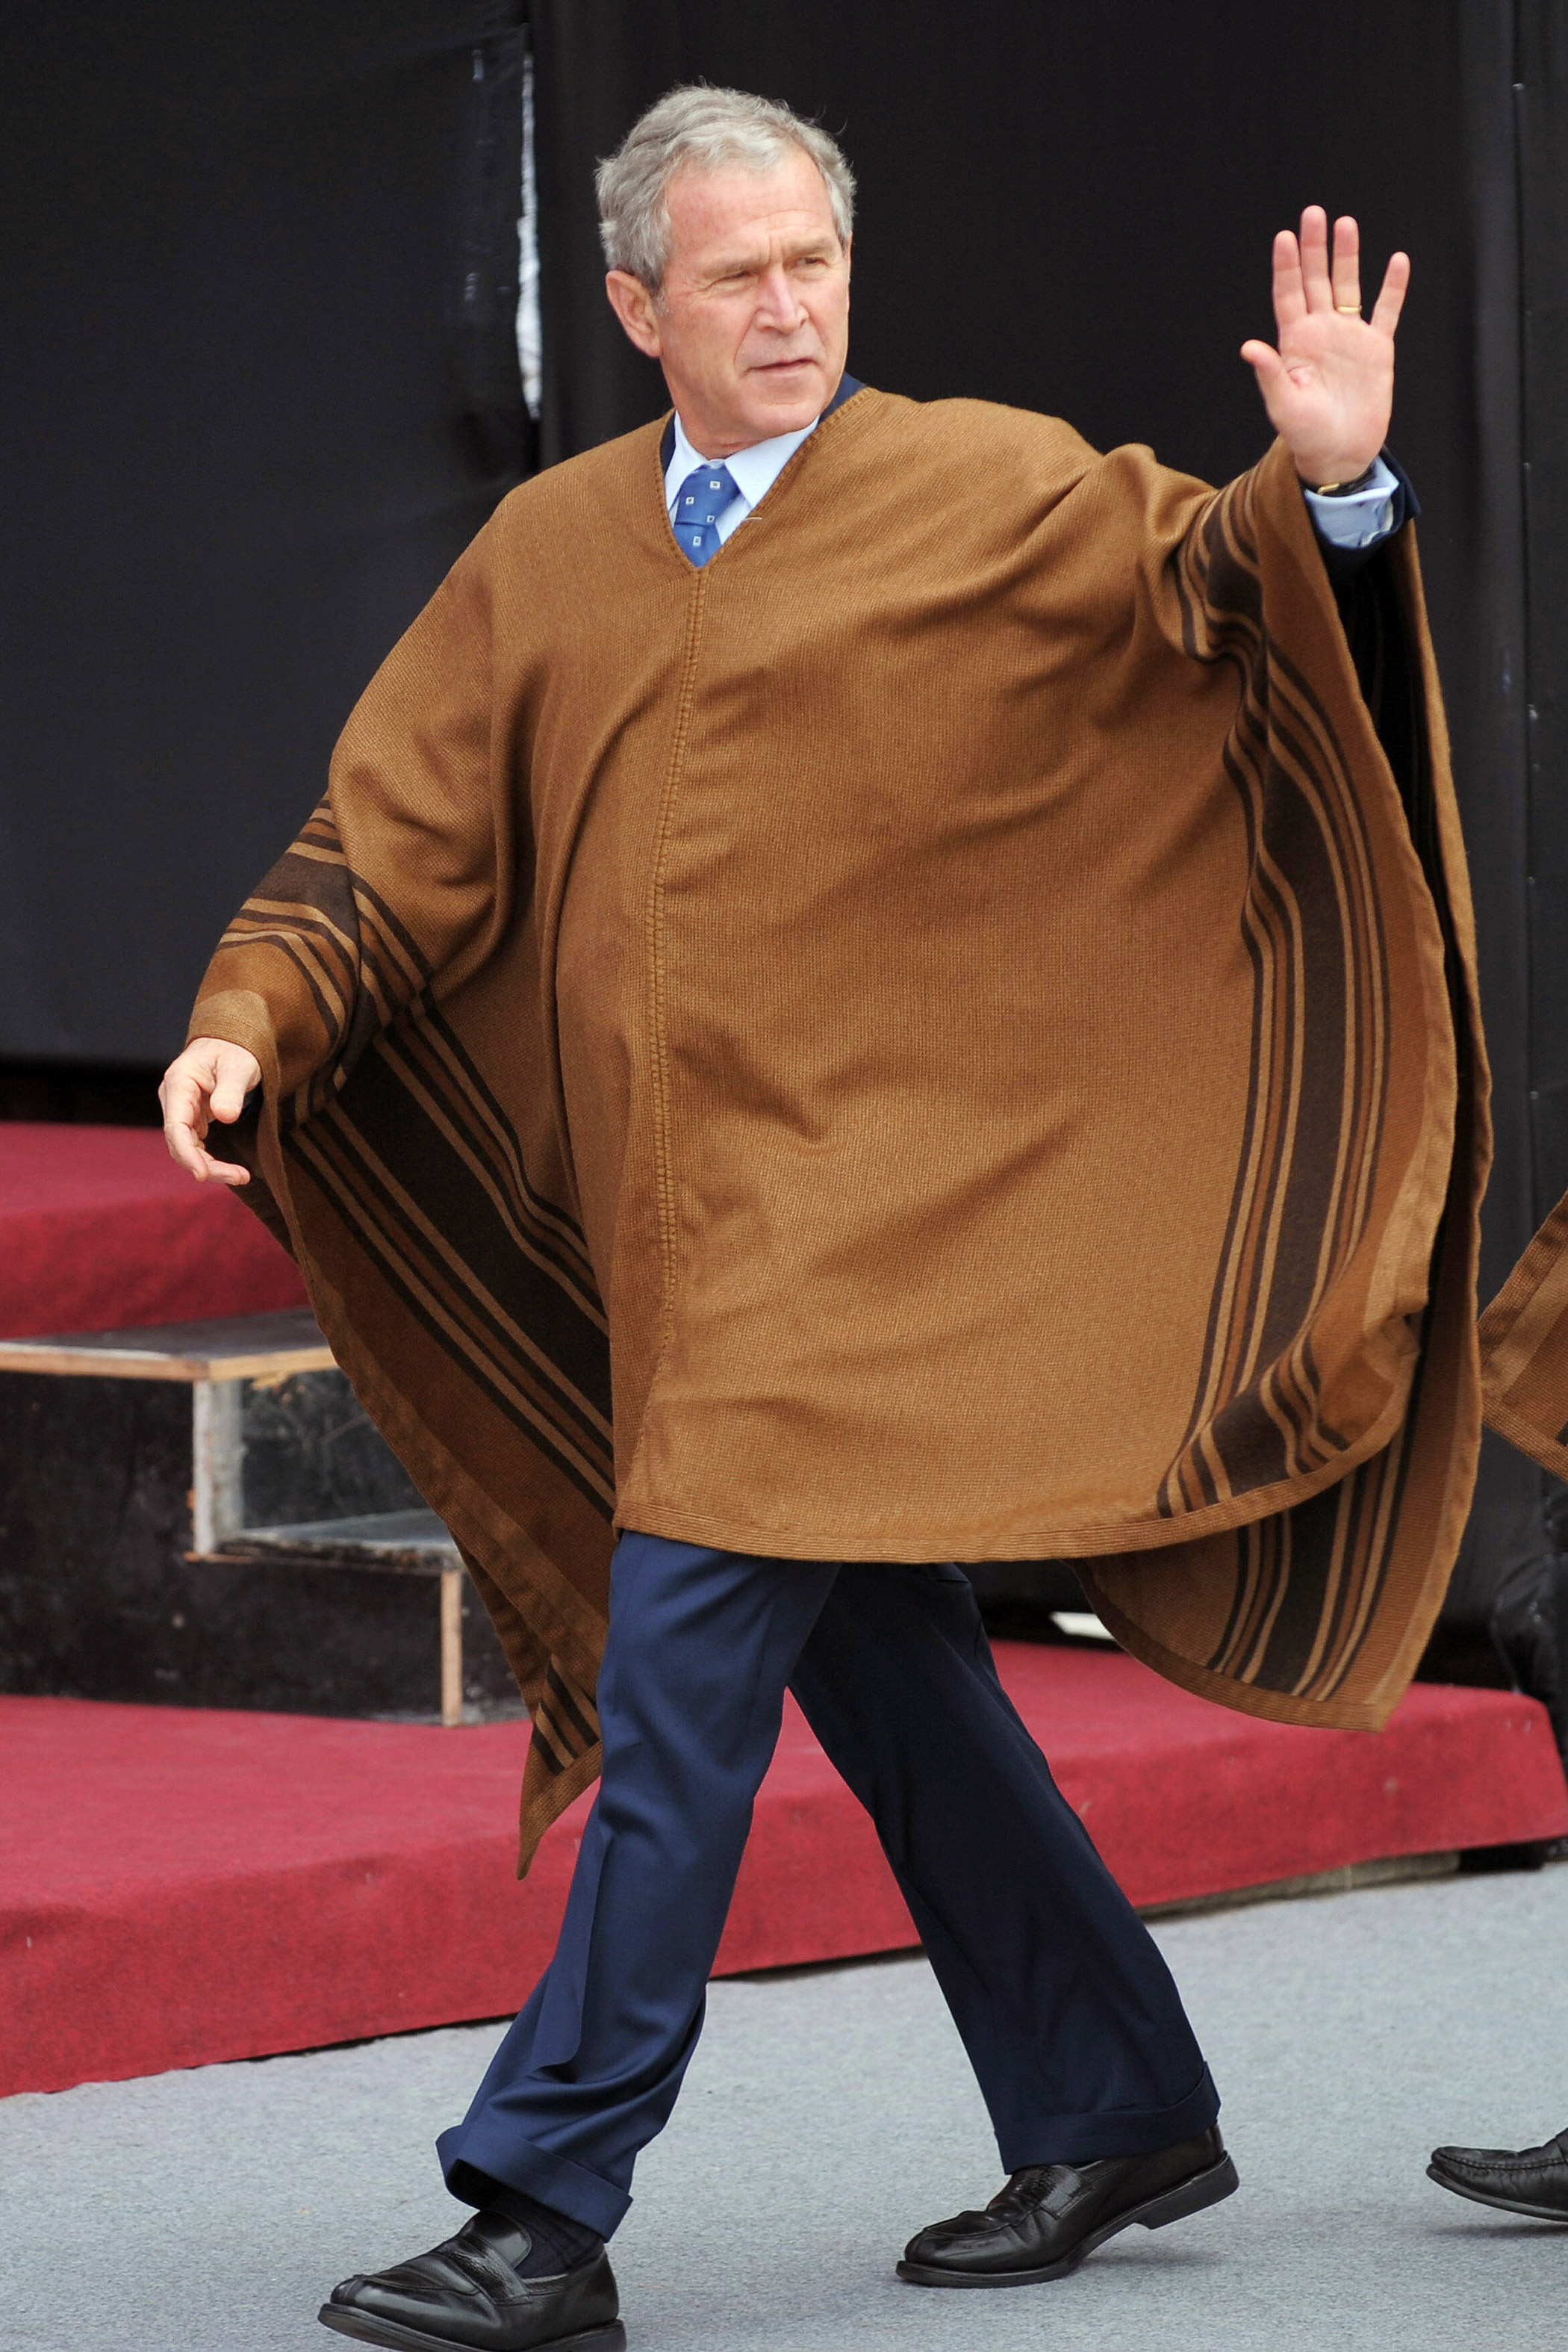 U.S. President George W. Bush, wearing a poncho, arrives for the official photograph for the APEC Summit on Nov. 23, 2008 in Lima.